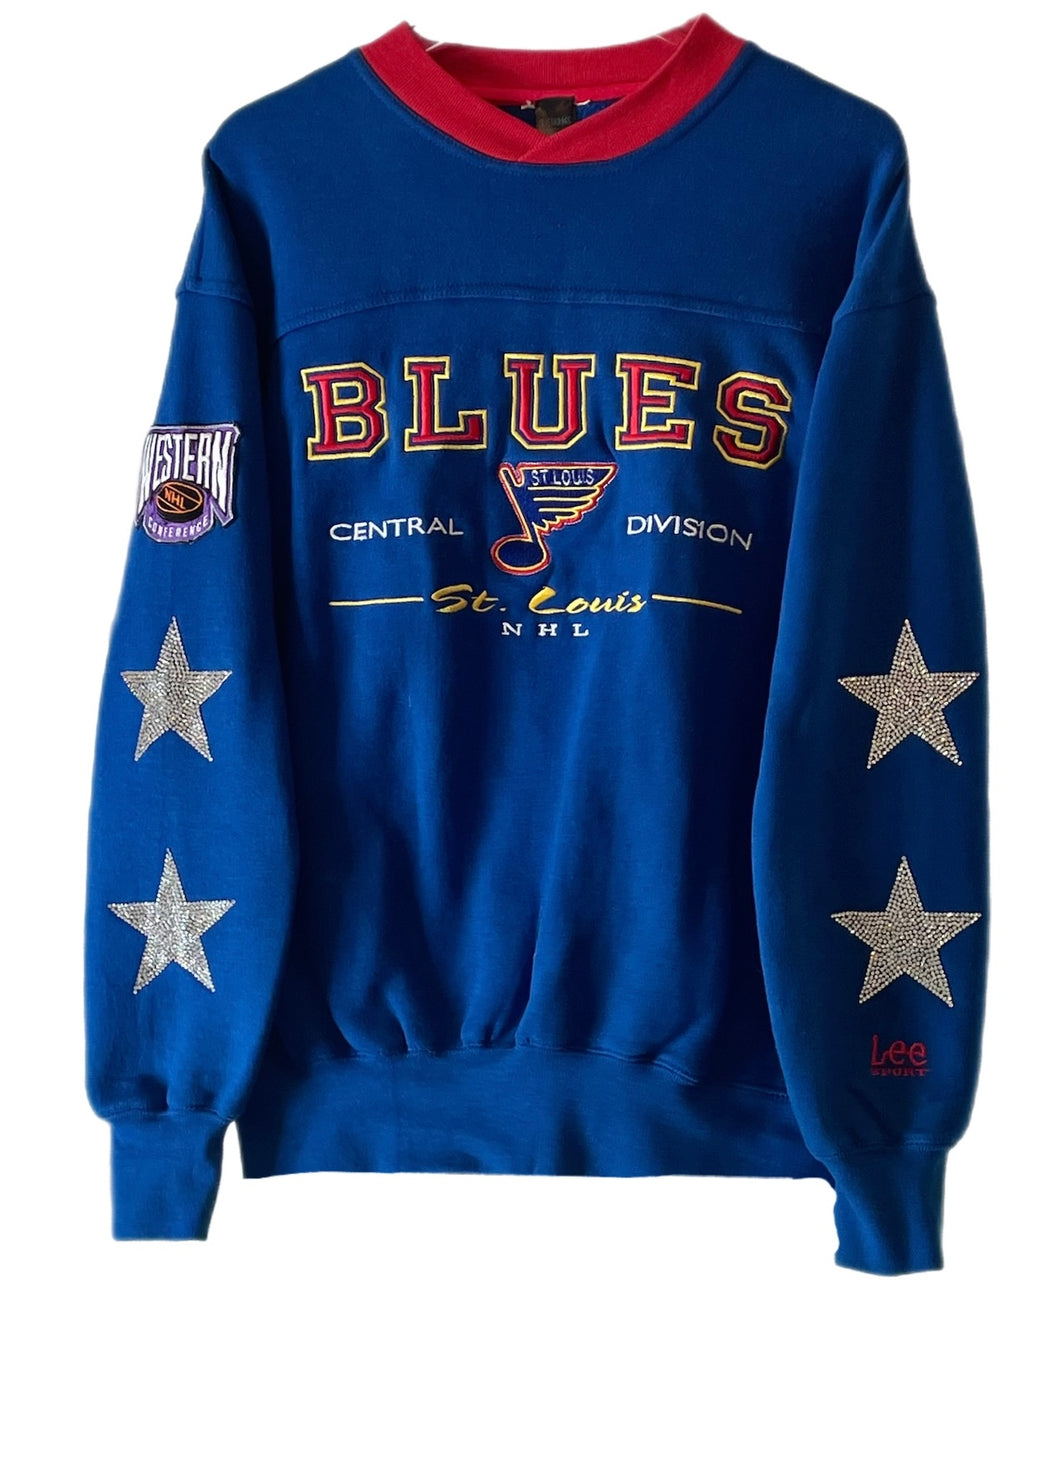 St. Louis Blues, NHL One of a KIND Vintage Sweatshirt with Crystal Star Design